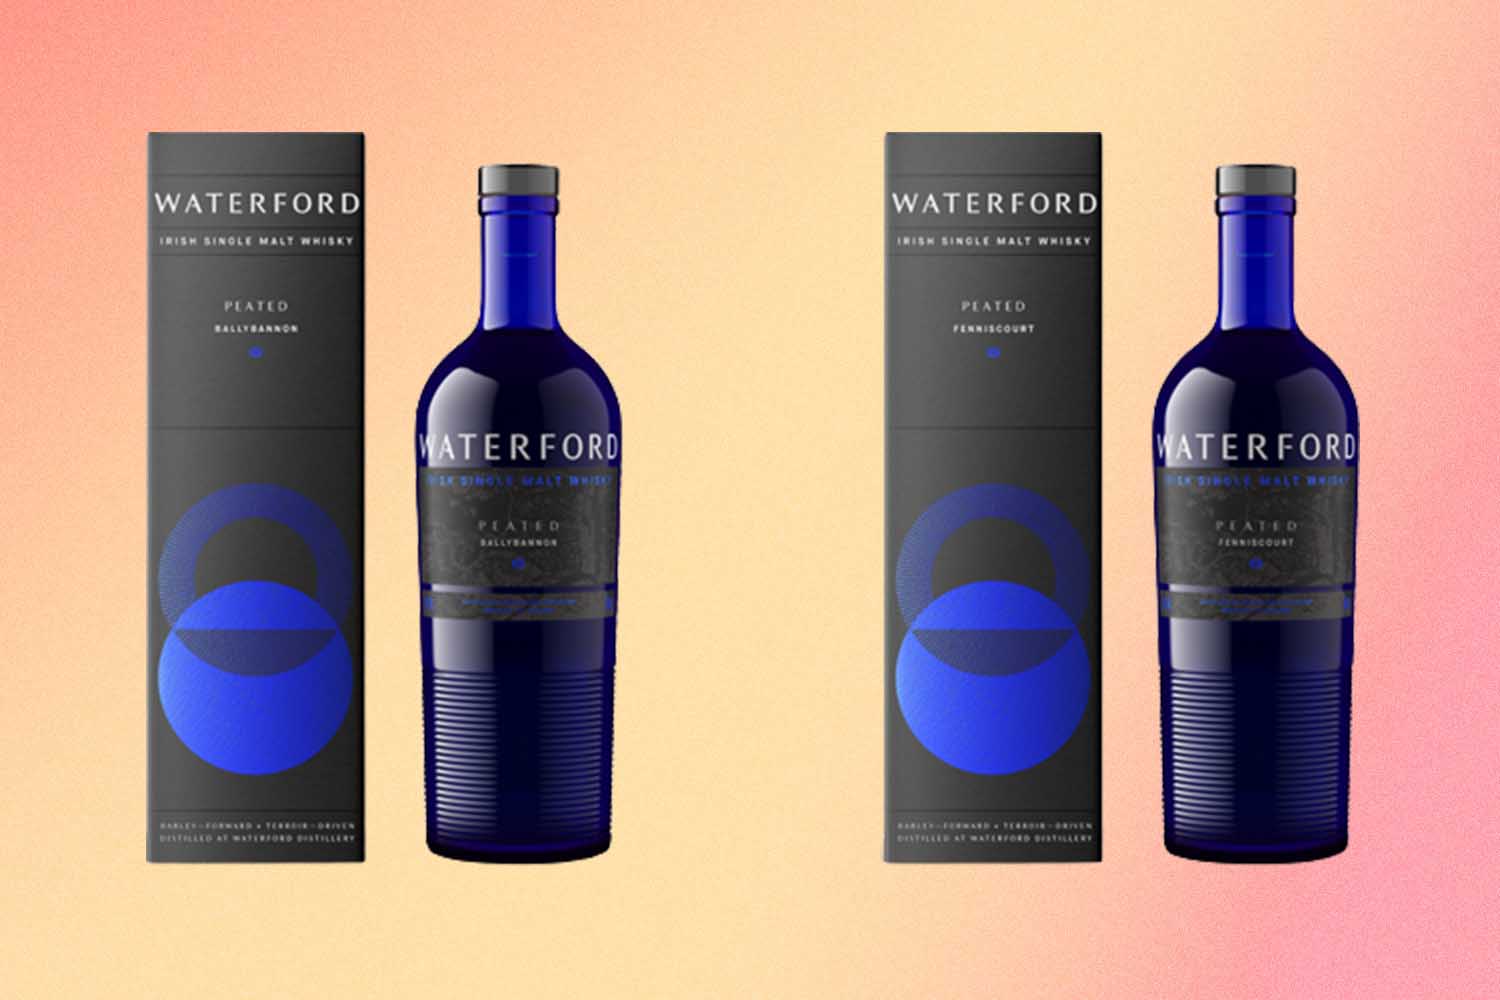 Waterford Whisky's new peated expressions